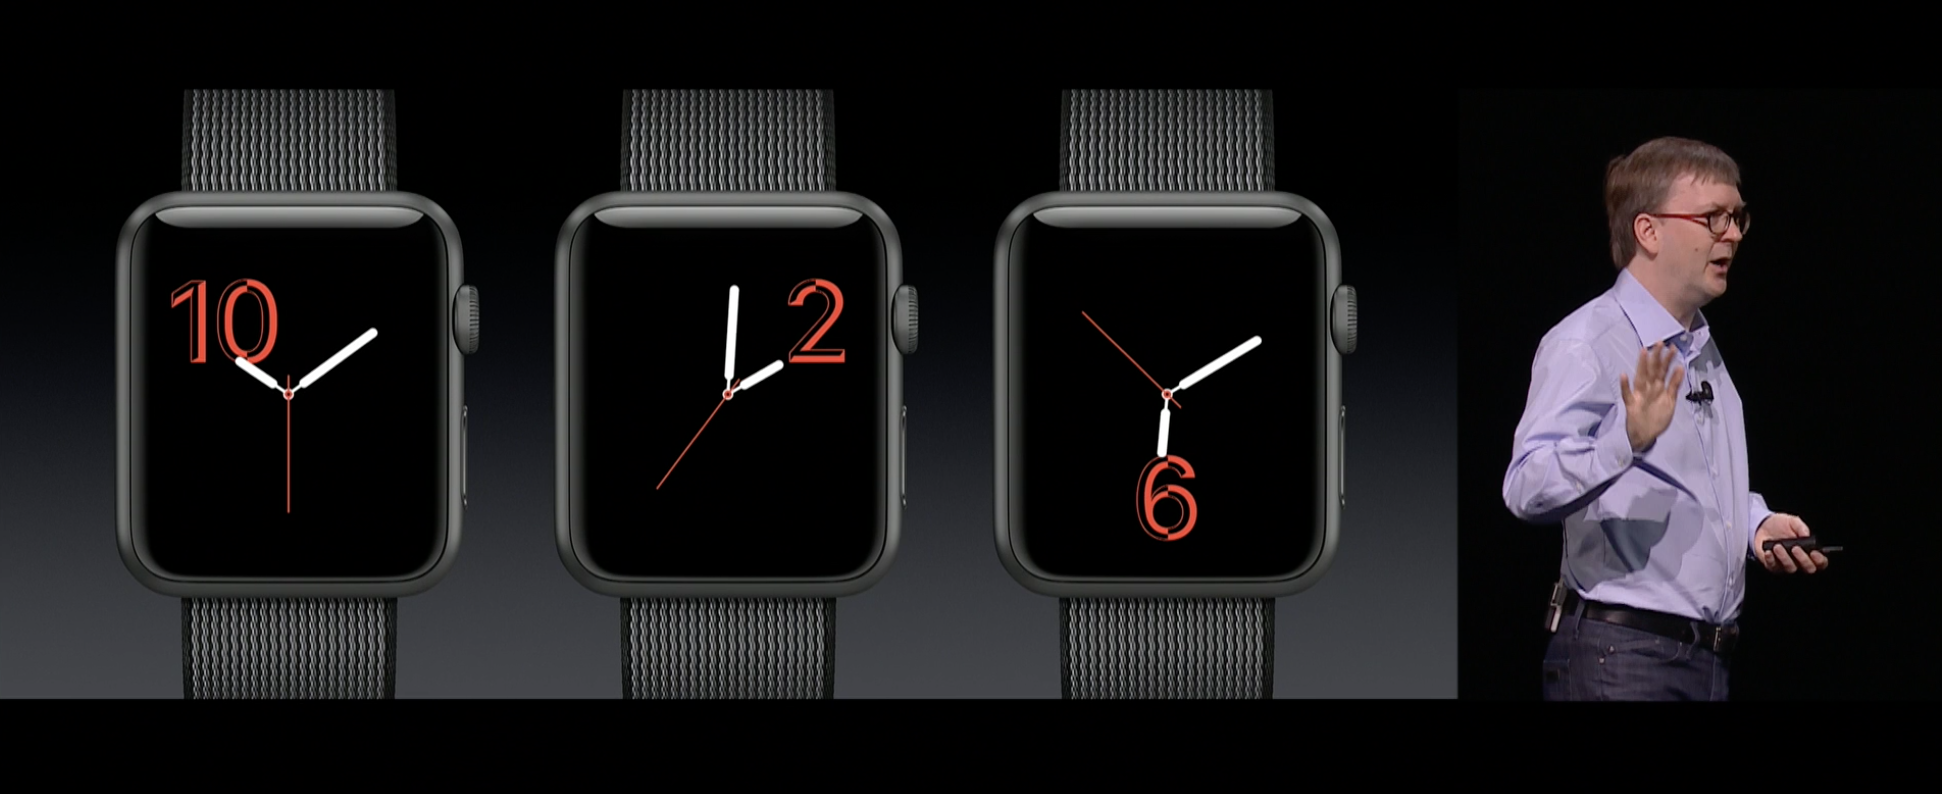 Supply Chain Report Suggests Apple Watch 2 Coming This Fall